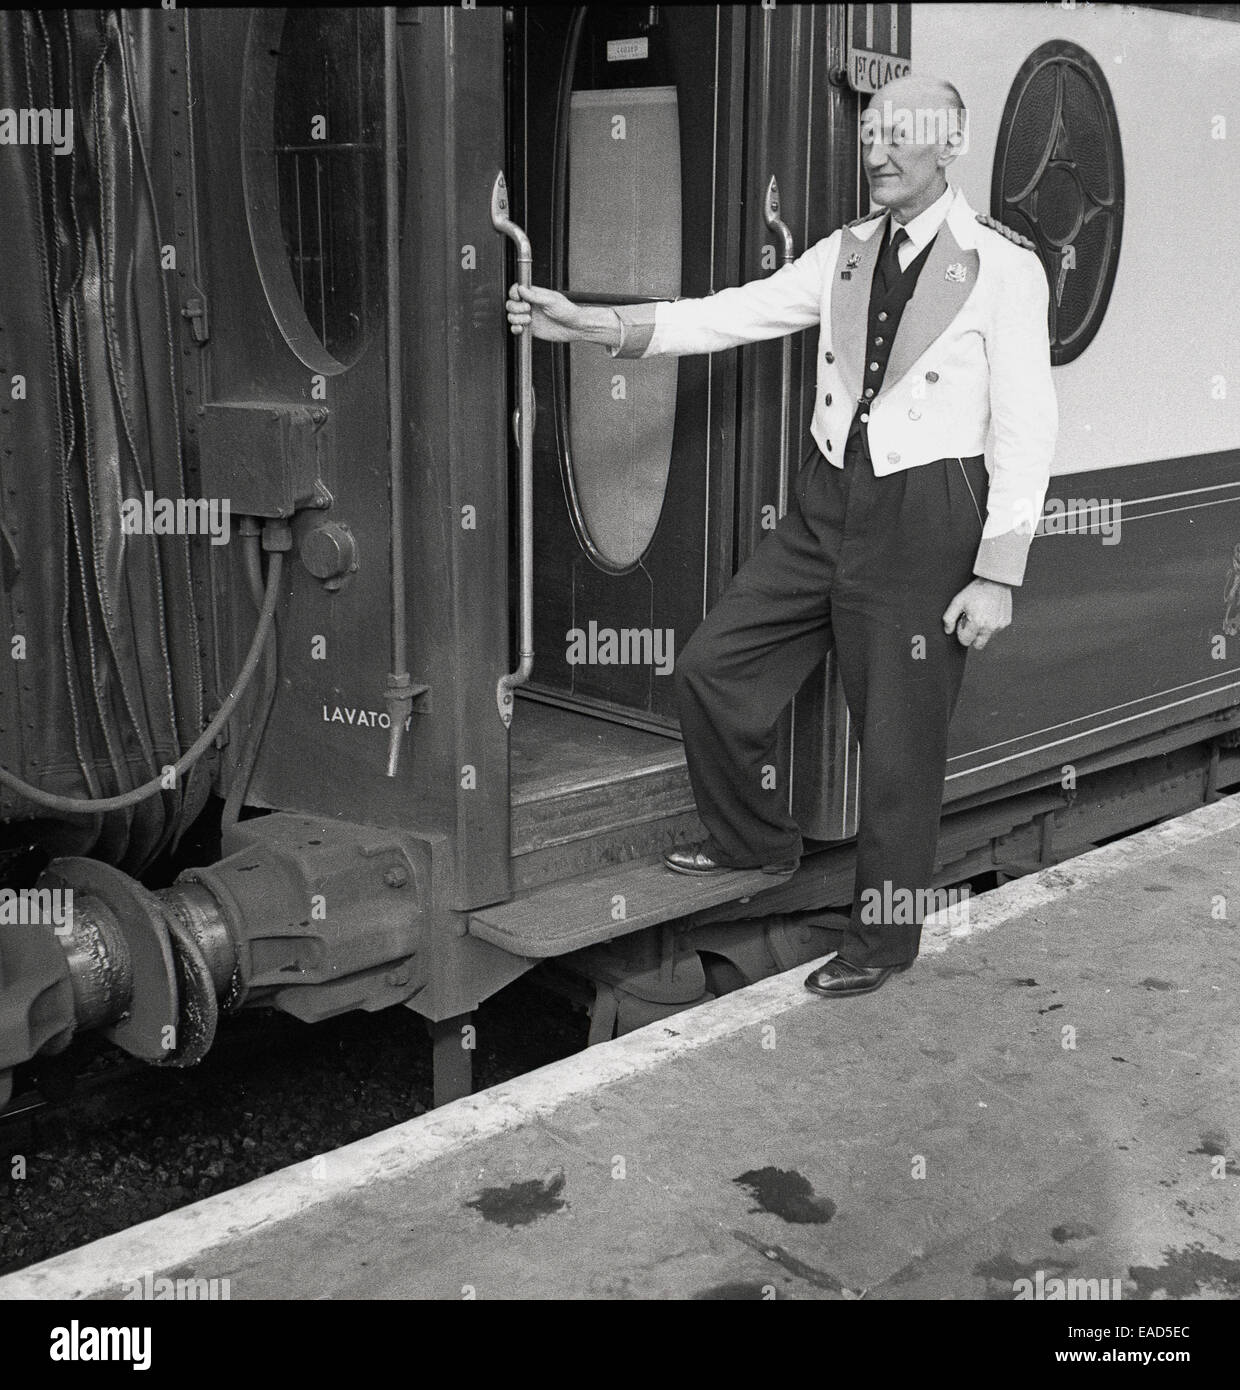 1950s, historical picture of the restaurant manager on the platform with the carriage train door open awaiting his Pullman guests or customers, Great Western, England. Stock Photo